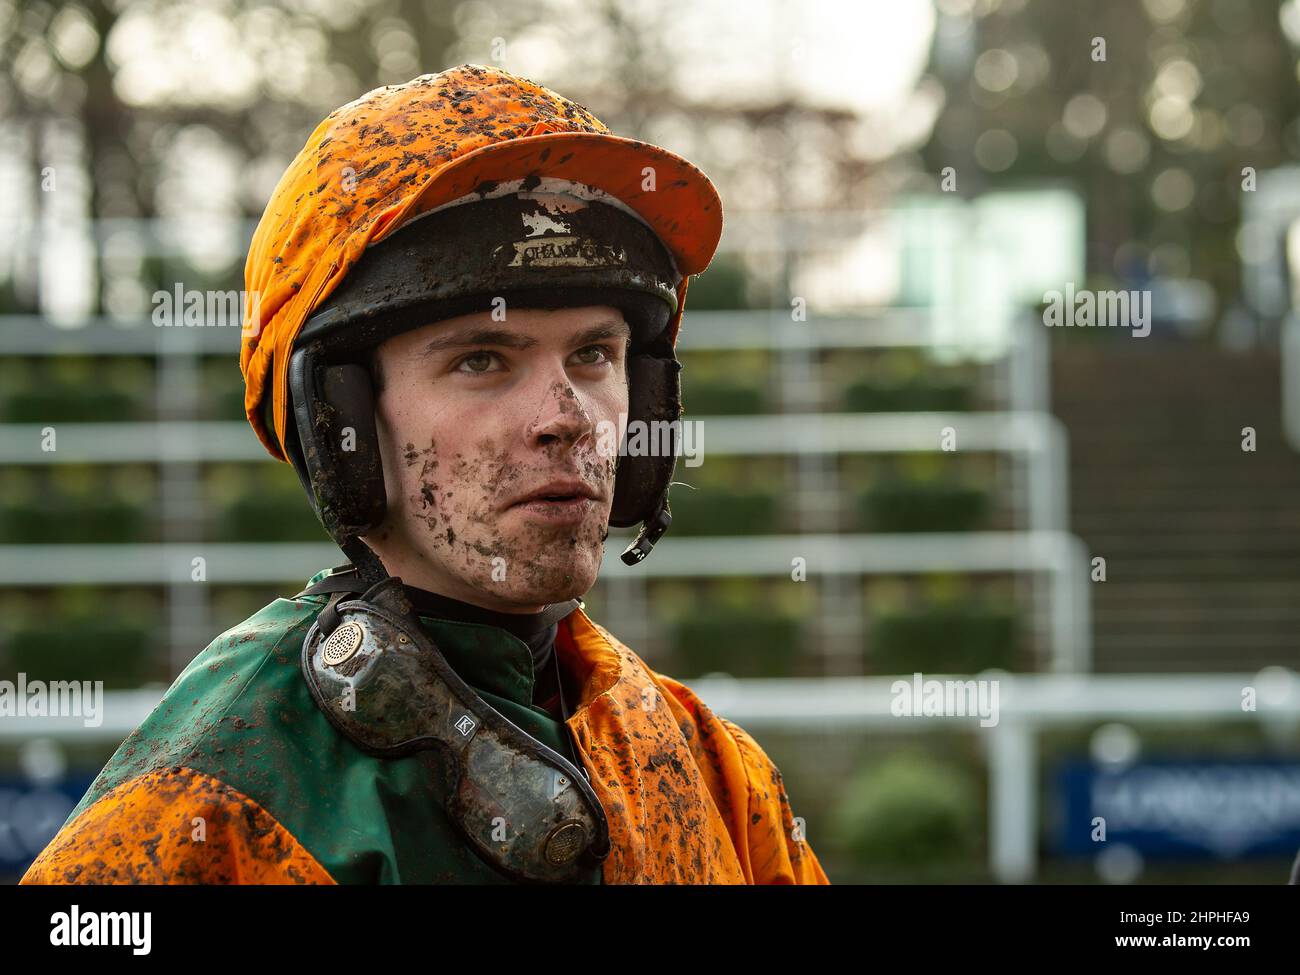 Ascot, Berkshire, UK. 19th February, 2022. Jockey Hugh Nugent winner of The GreatBritishStallion-Showcase.co.uk Swinley Chase (A Limited Handicap) (Class 1) (Listed Race) (GBB Race) on horse Fortescue. Owner and Trainer Mr T F F Nixon. Credit: Maureen McLean/Alamy Stock Photo